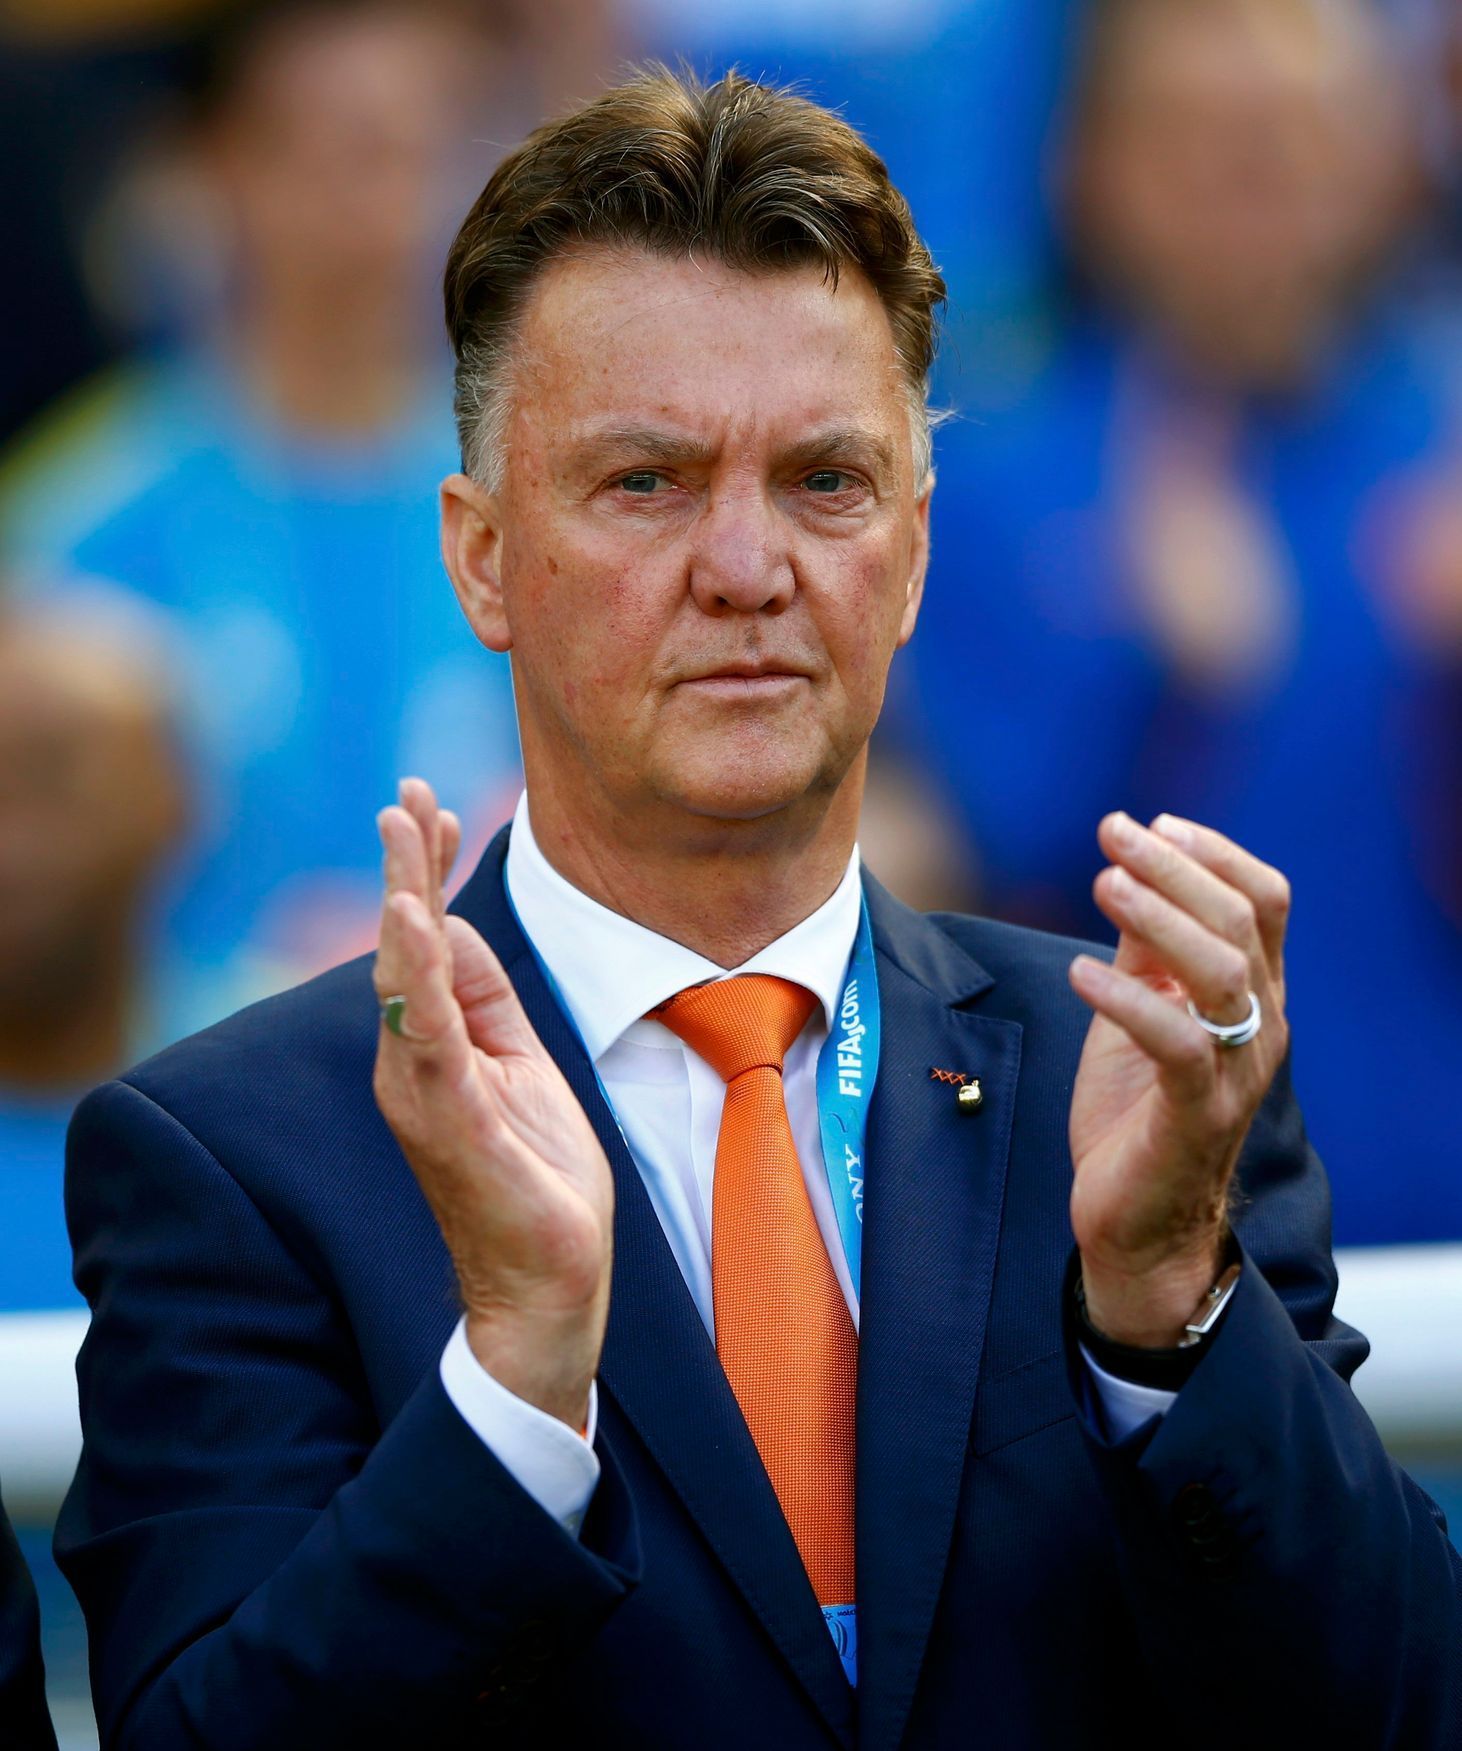 Netherlands coach Louis van Gaal claps at the 2014 World Cup Group B soccer match between Australia and Netherlands at the Beira Rio stadium